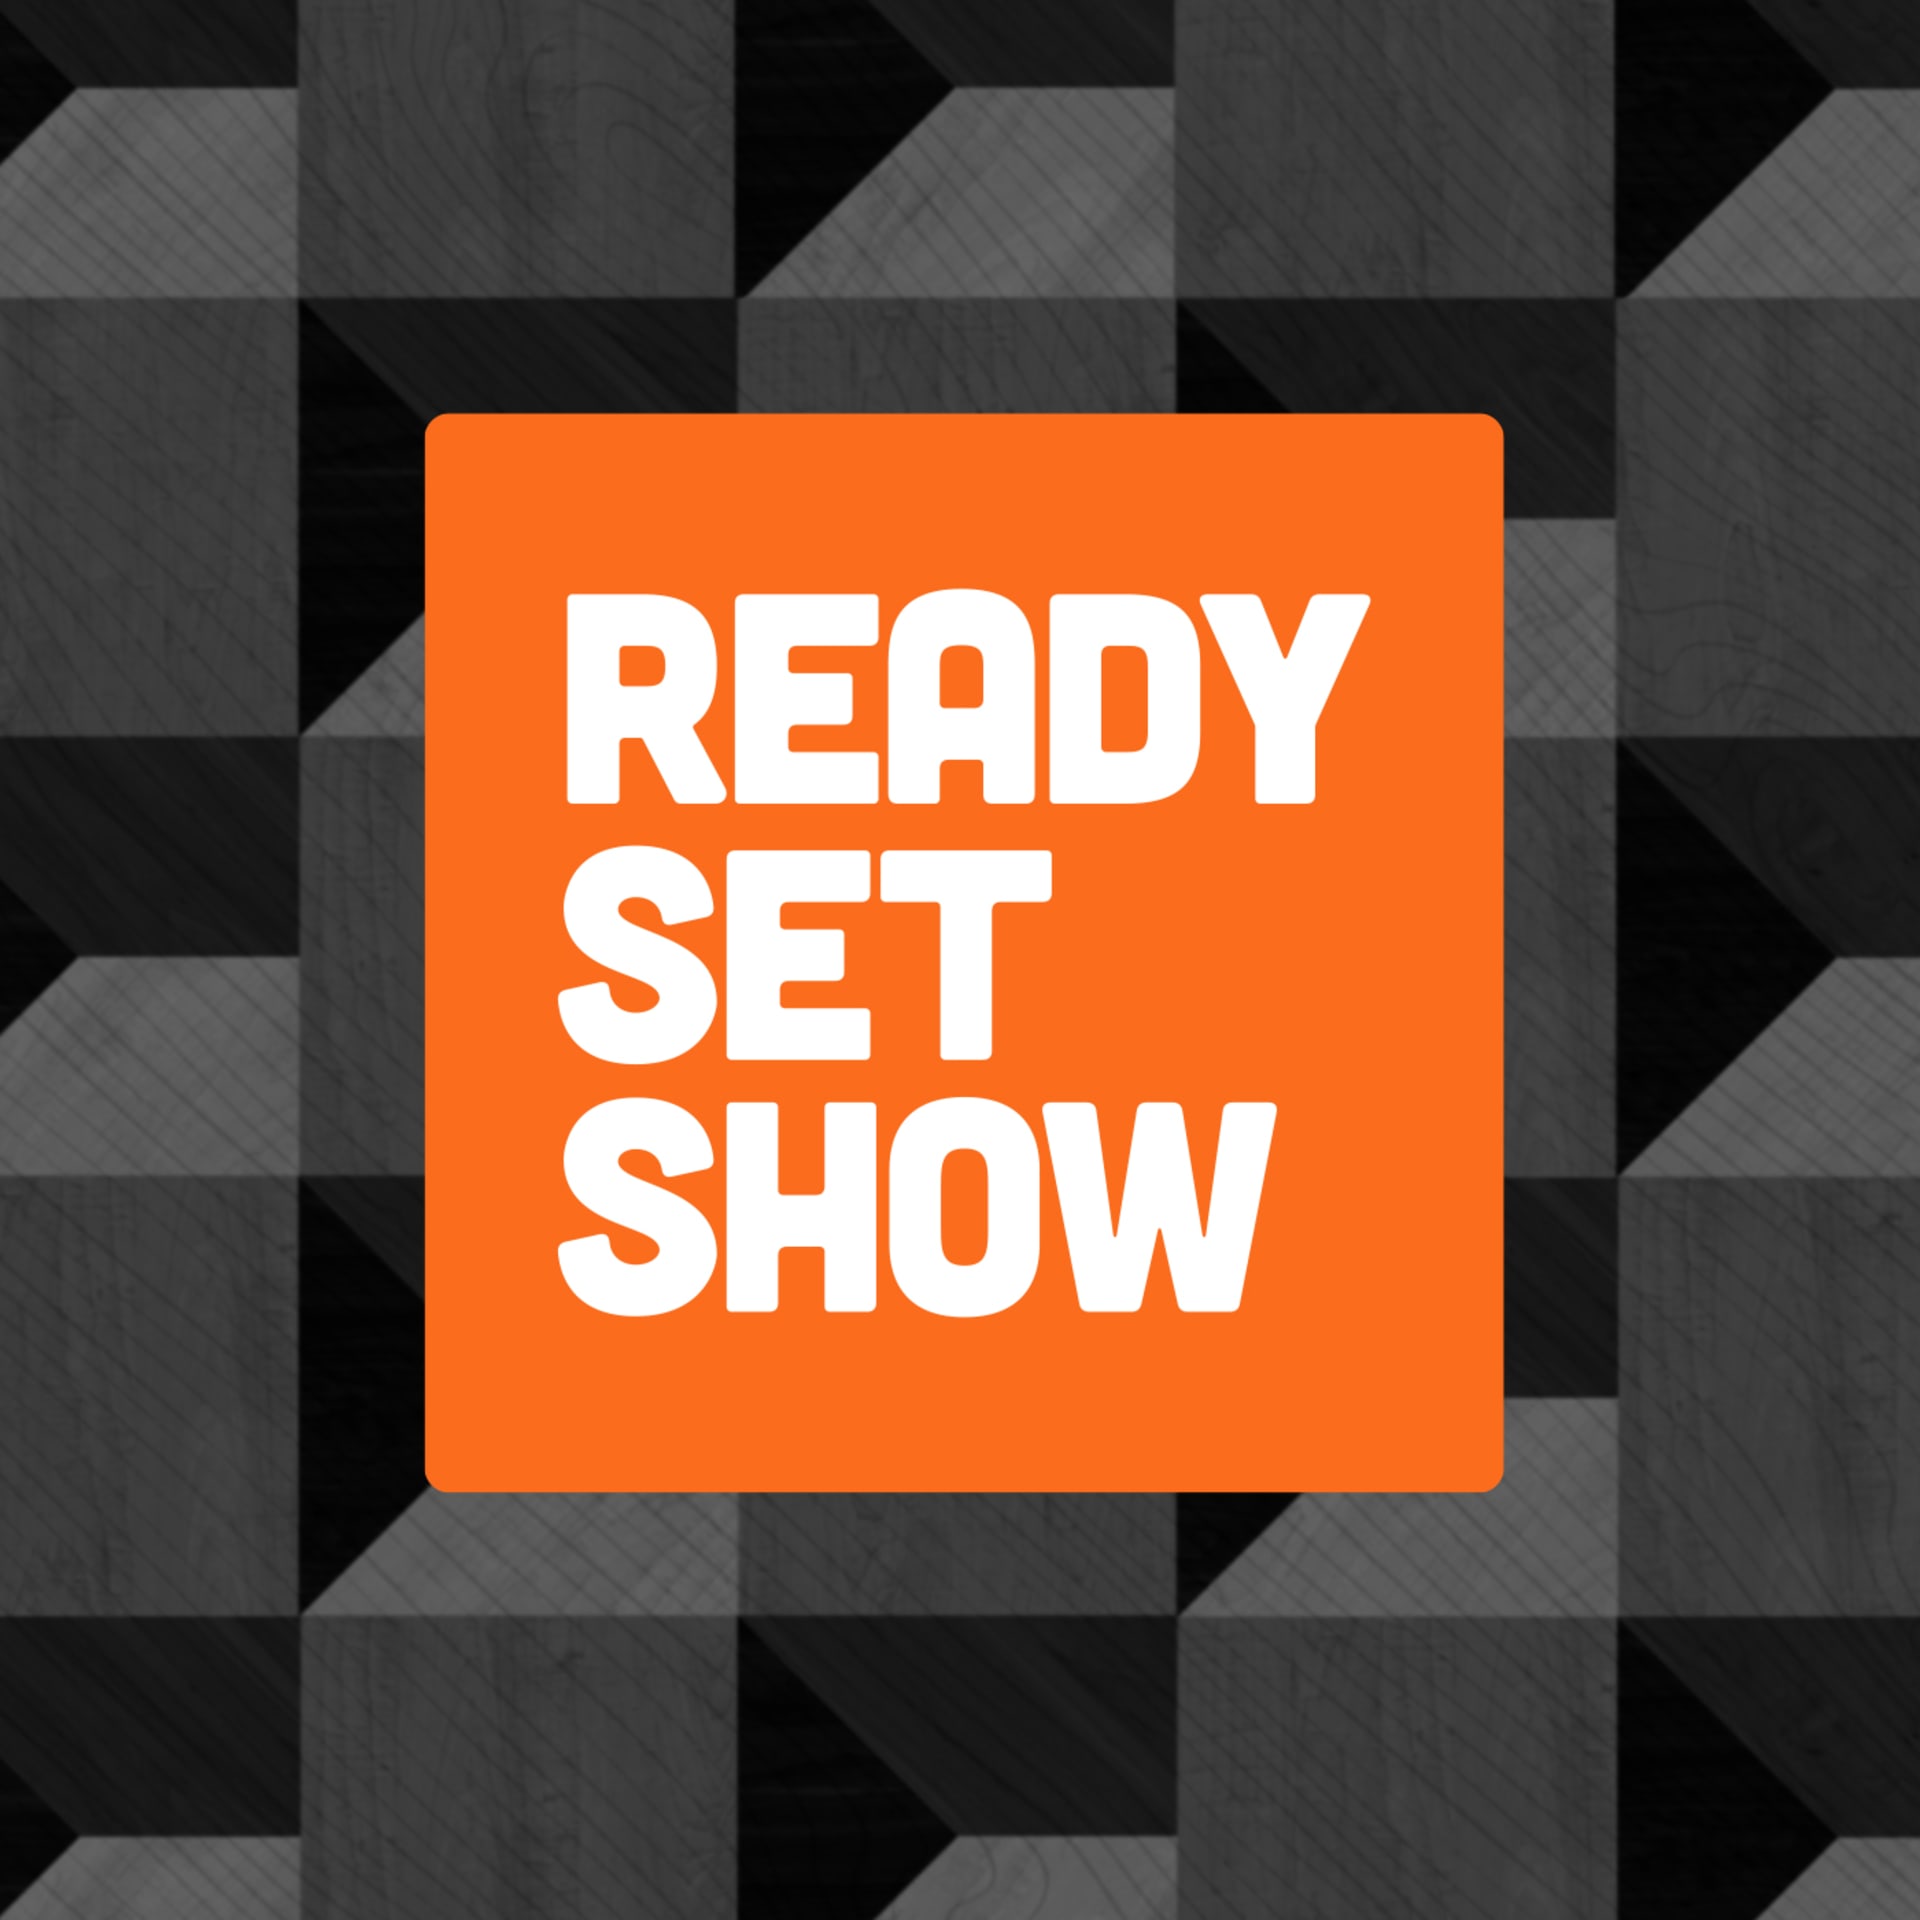 Ready Set Show - Rooster Teeth